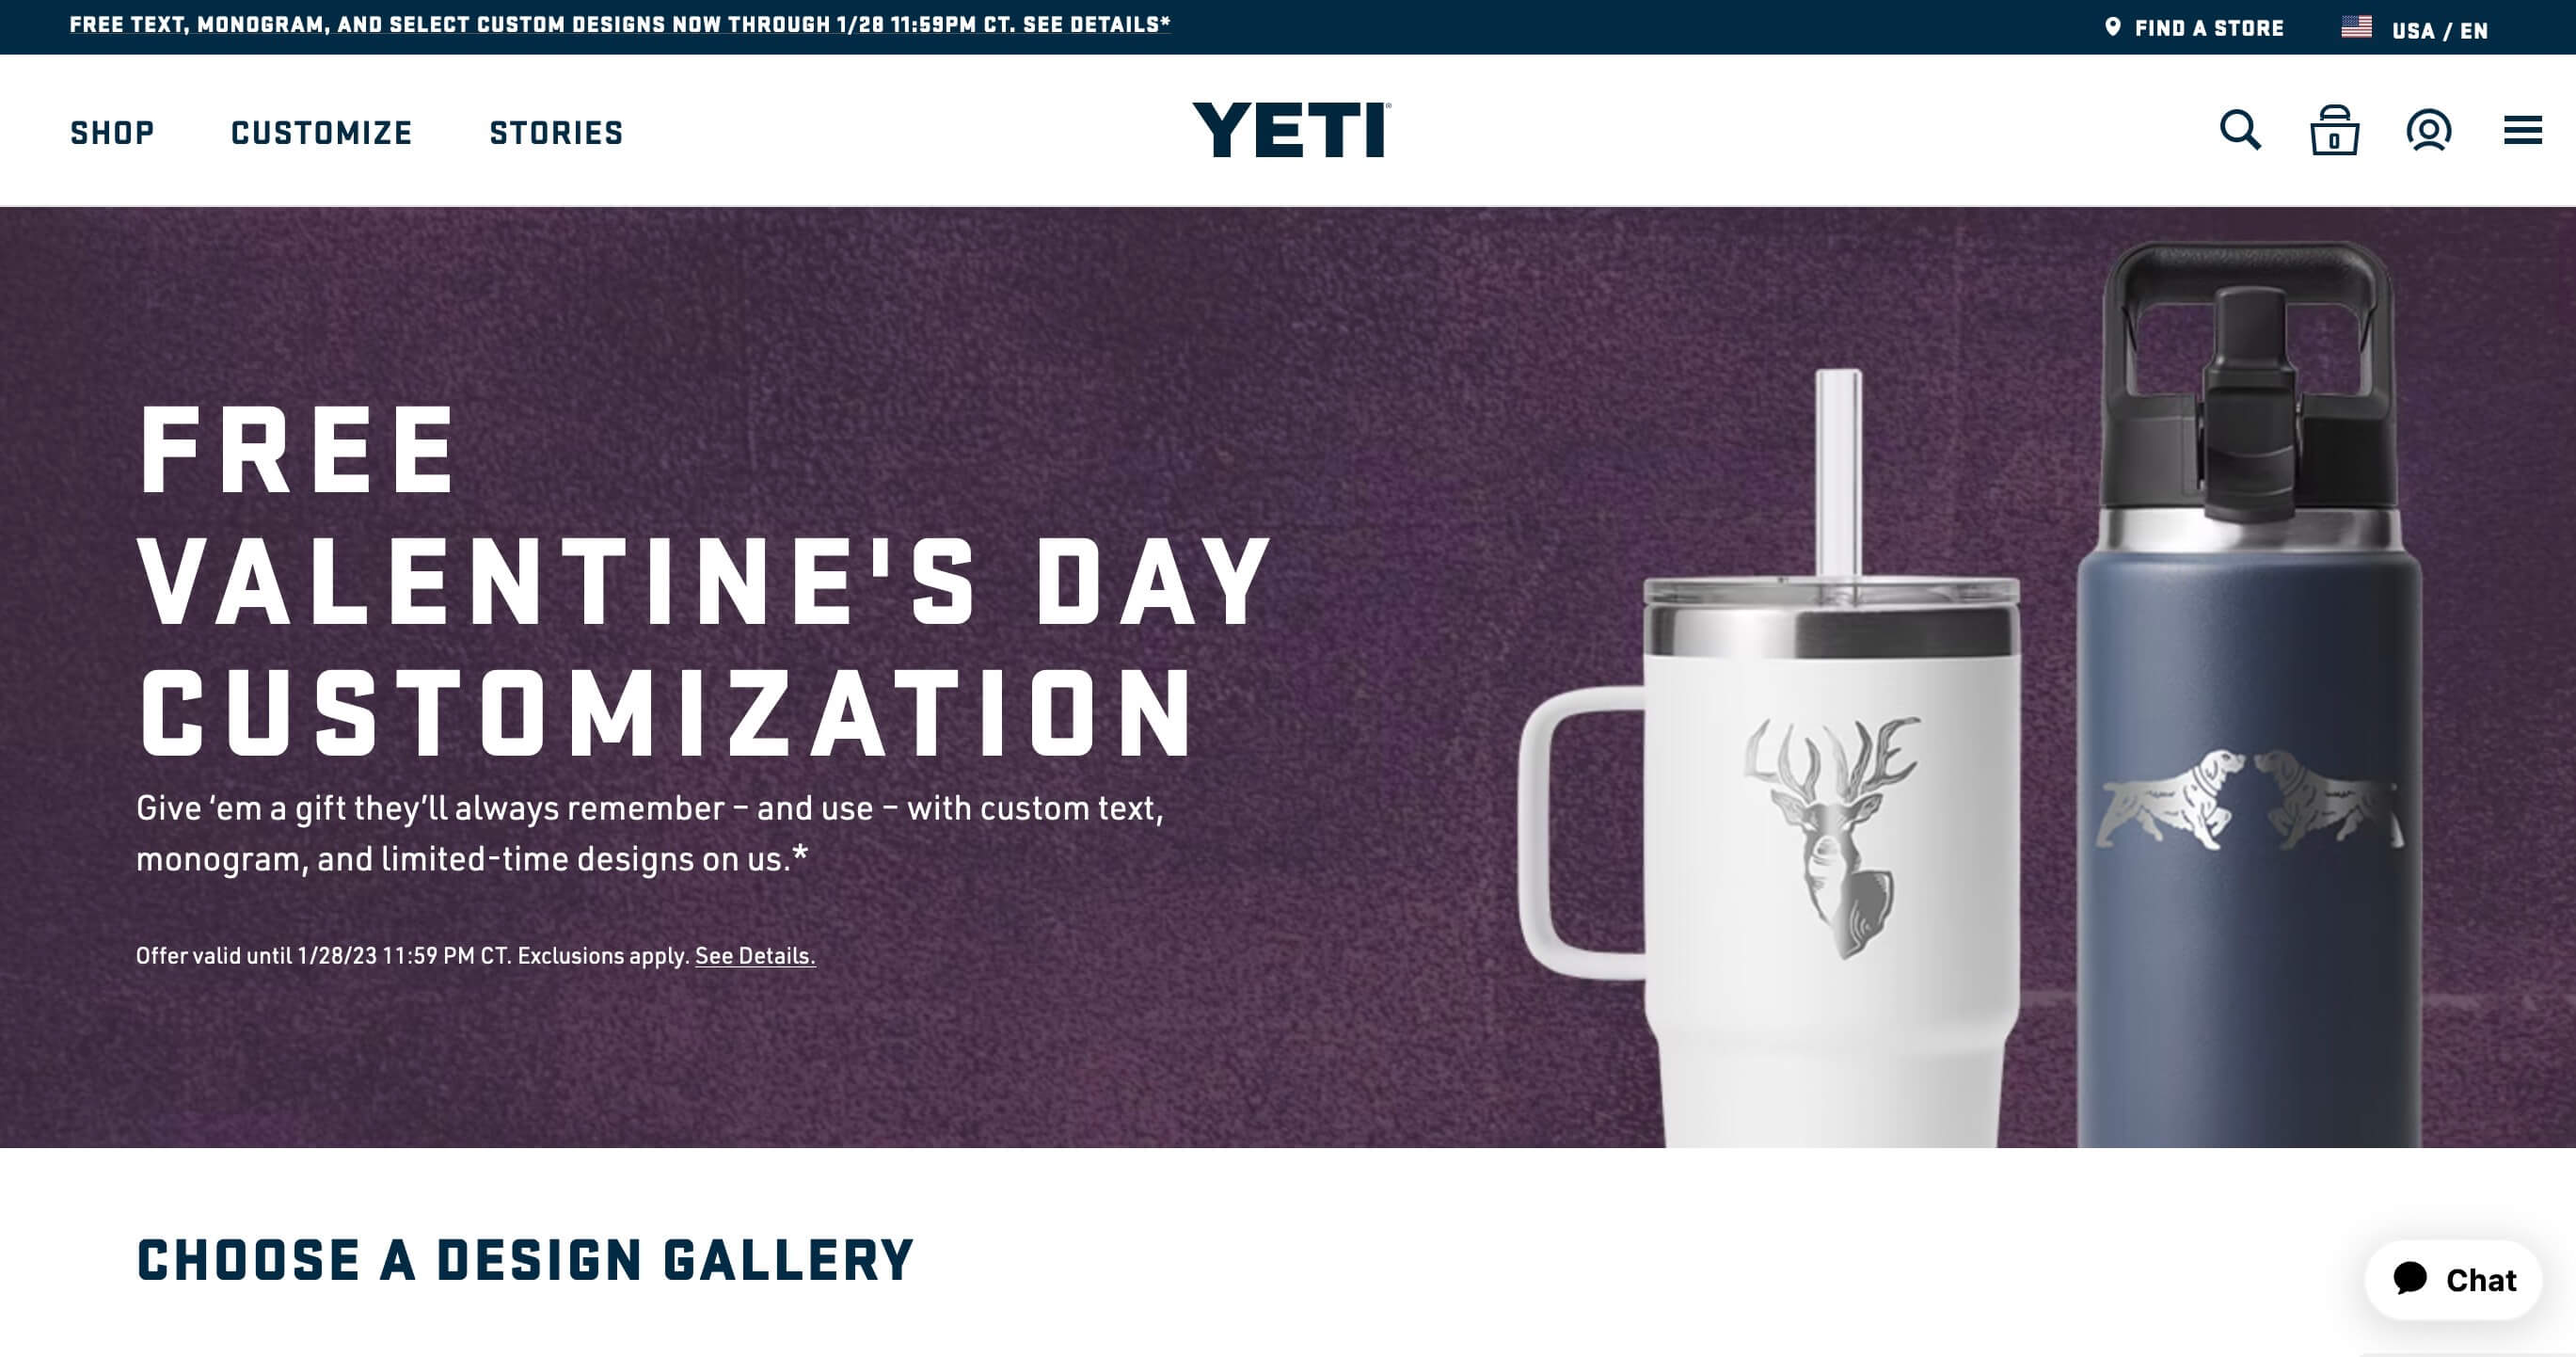 Yeti free personalization promo with holiday-specific designs and monograms